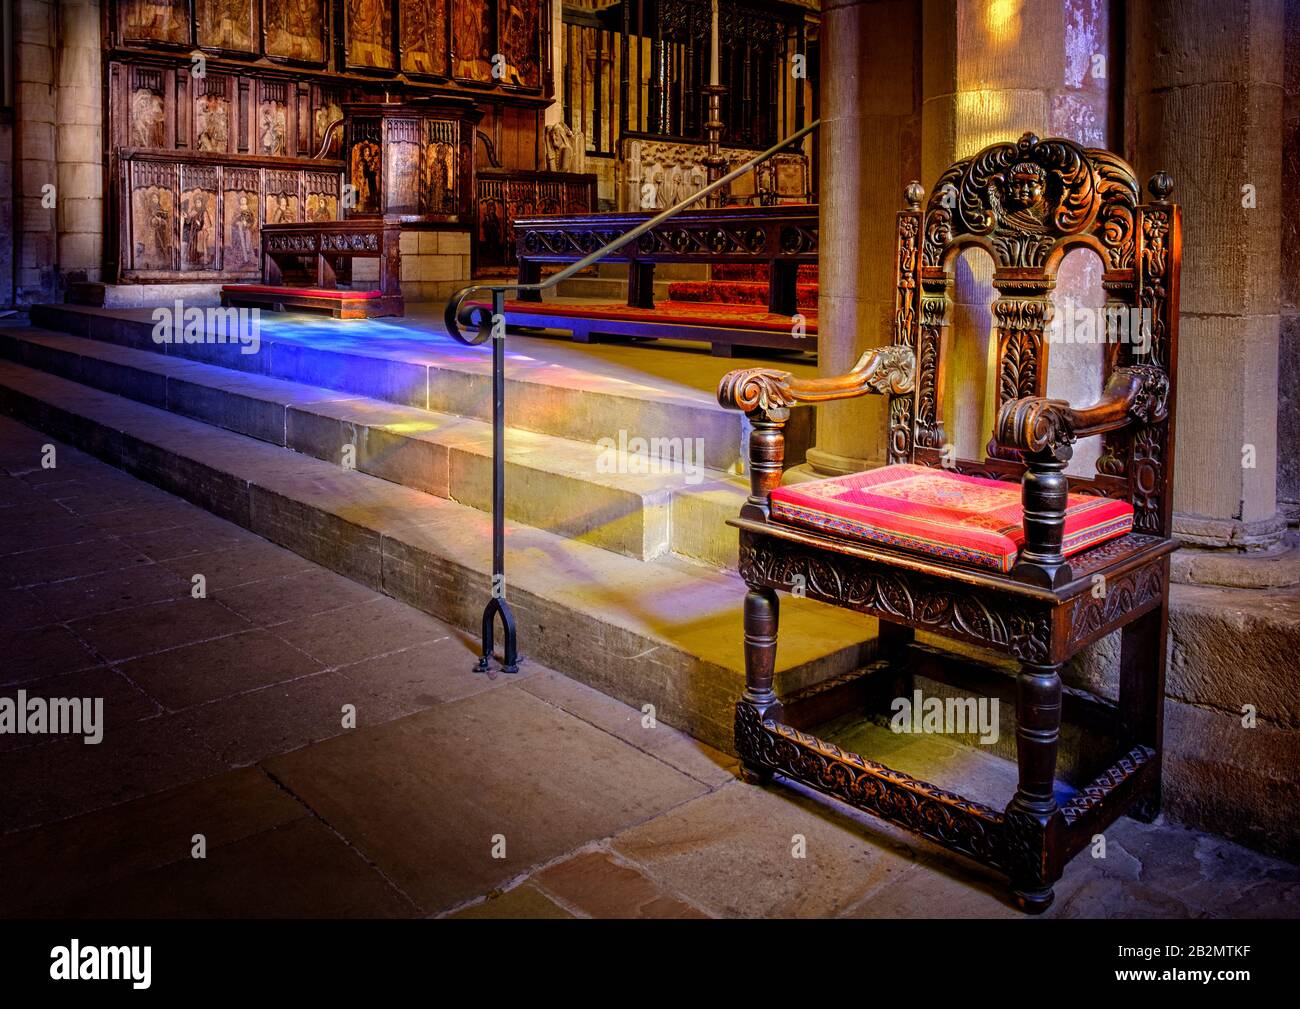 Antique wooden chair in the sunlit interior of Hexham Abbey. Sunshine throuf stained glass causing dappled patterns of coloured light on stone steps. Stock Photo